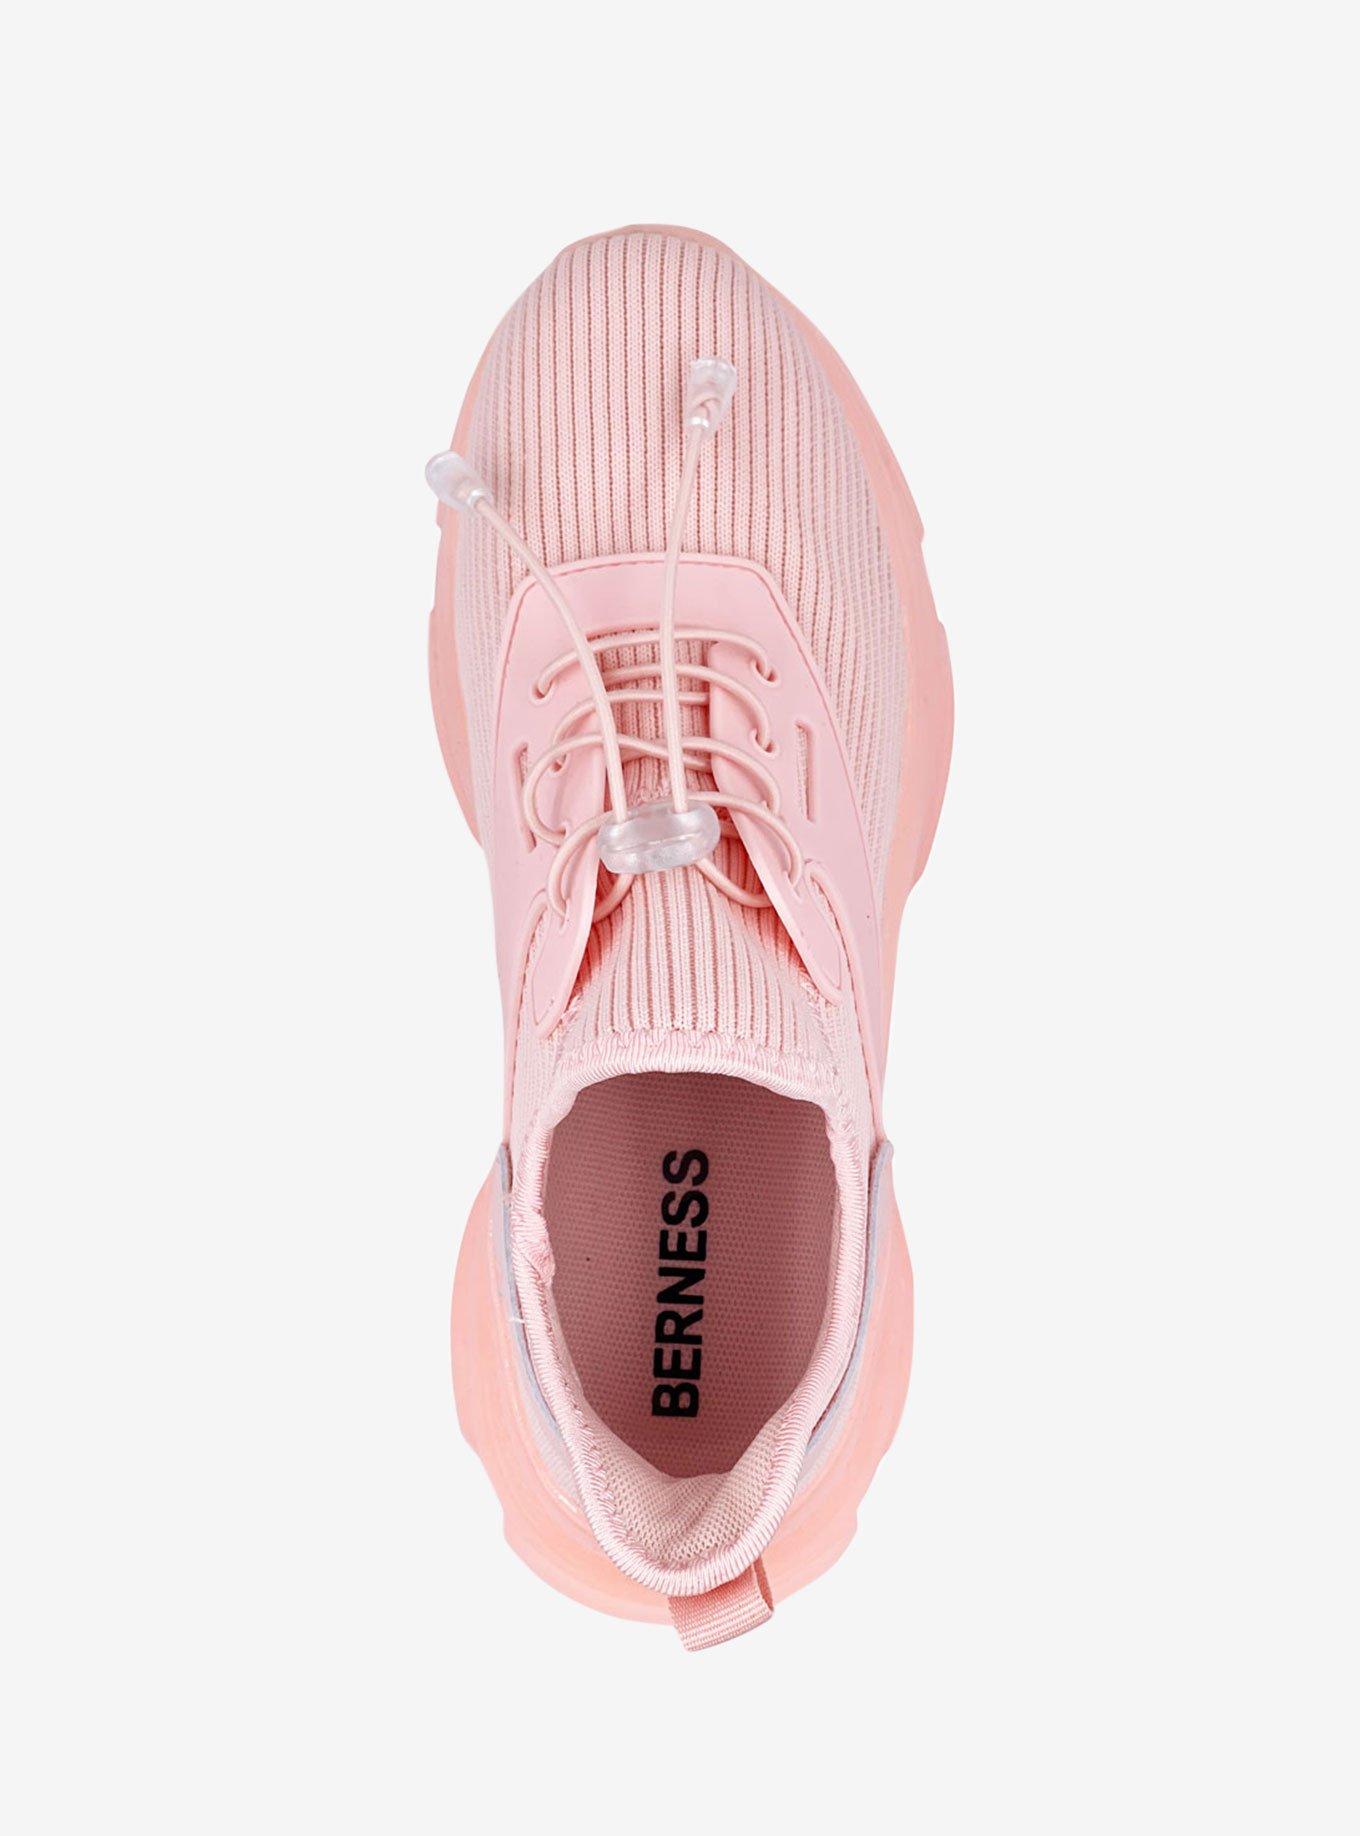 Sloan Knit Upper Sneaker with Chunky Bottom Pink, PINK, alternate